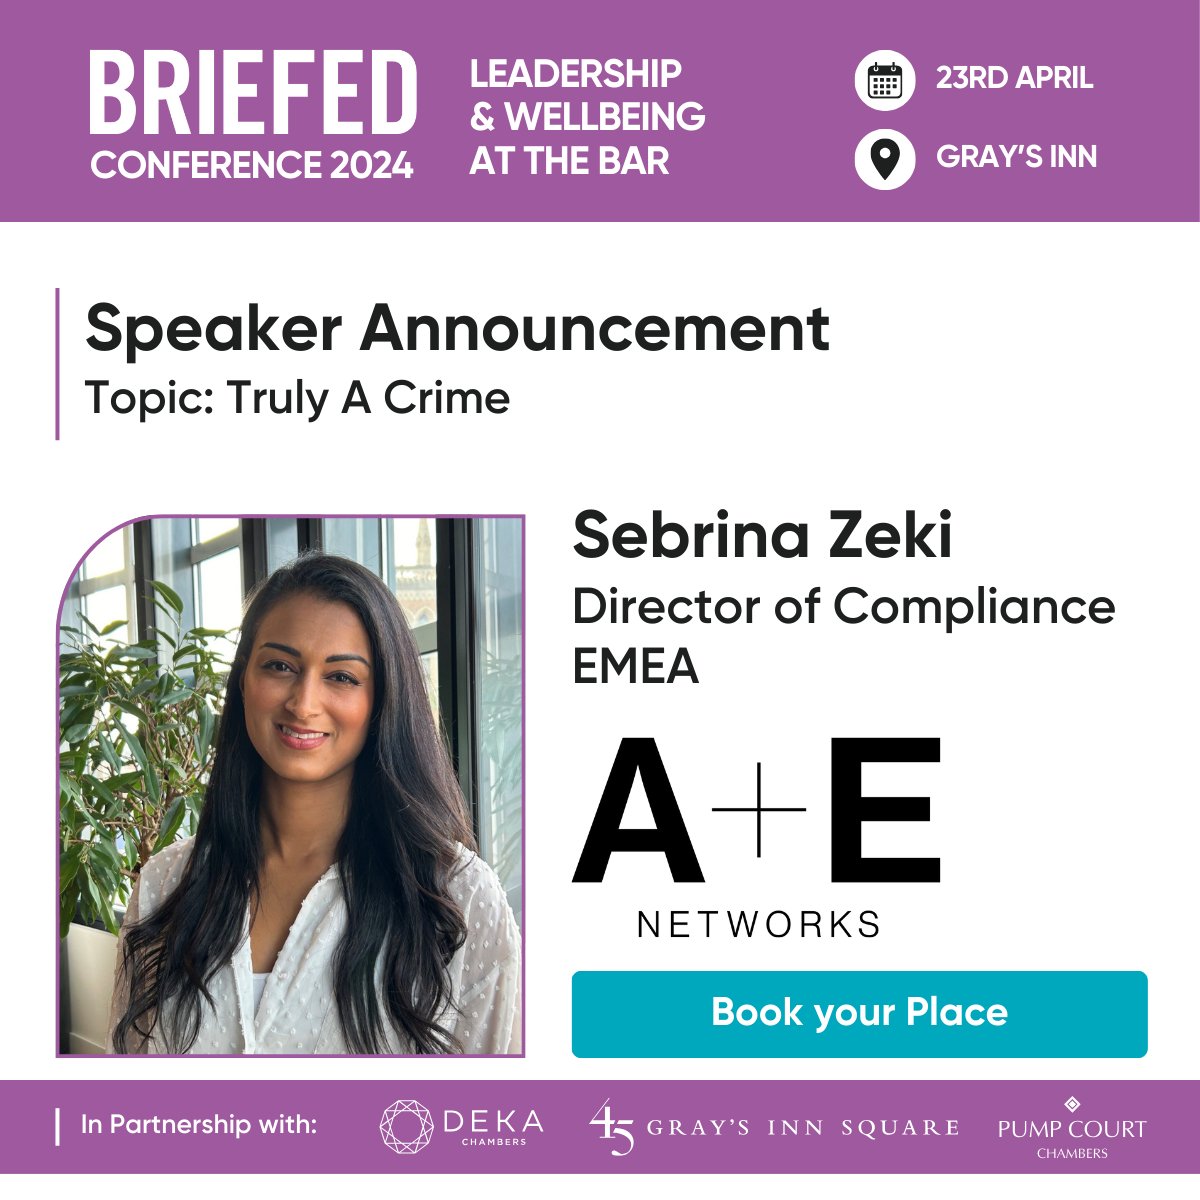 Excited to announce Sebrina Zeki, Director of Compliance EMEA at @AENetworks as a speaker at our Leadership and Wellbeing conference. Join us on the day and learn from her expertise in managing risks around traumatic content in the TV and film industry bit.ly/3uOijAO